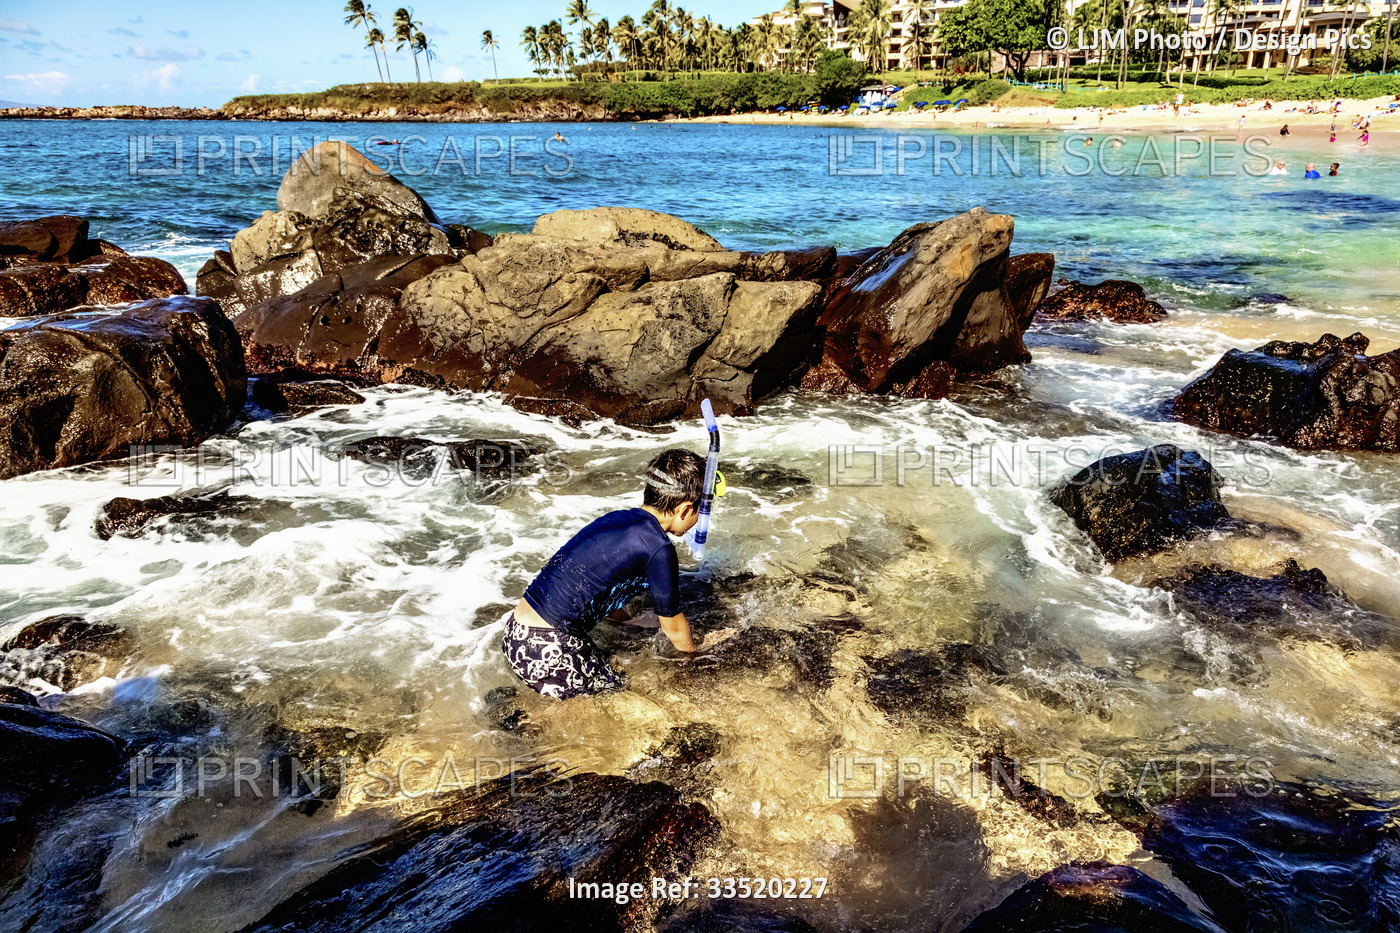 A young boy with snorkeling gear exploring the water amongst the rocks at the ...